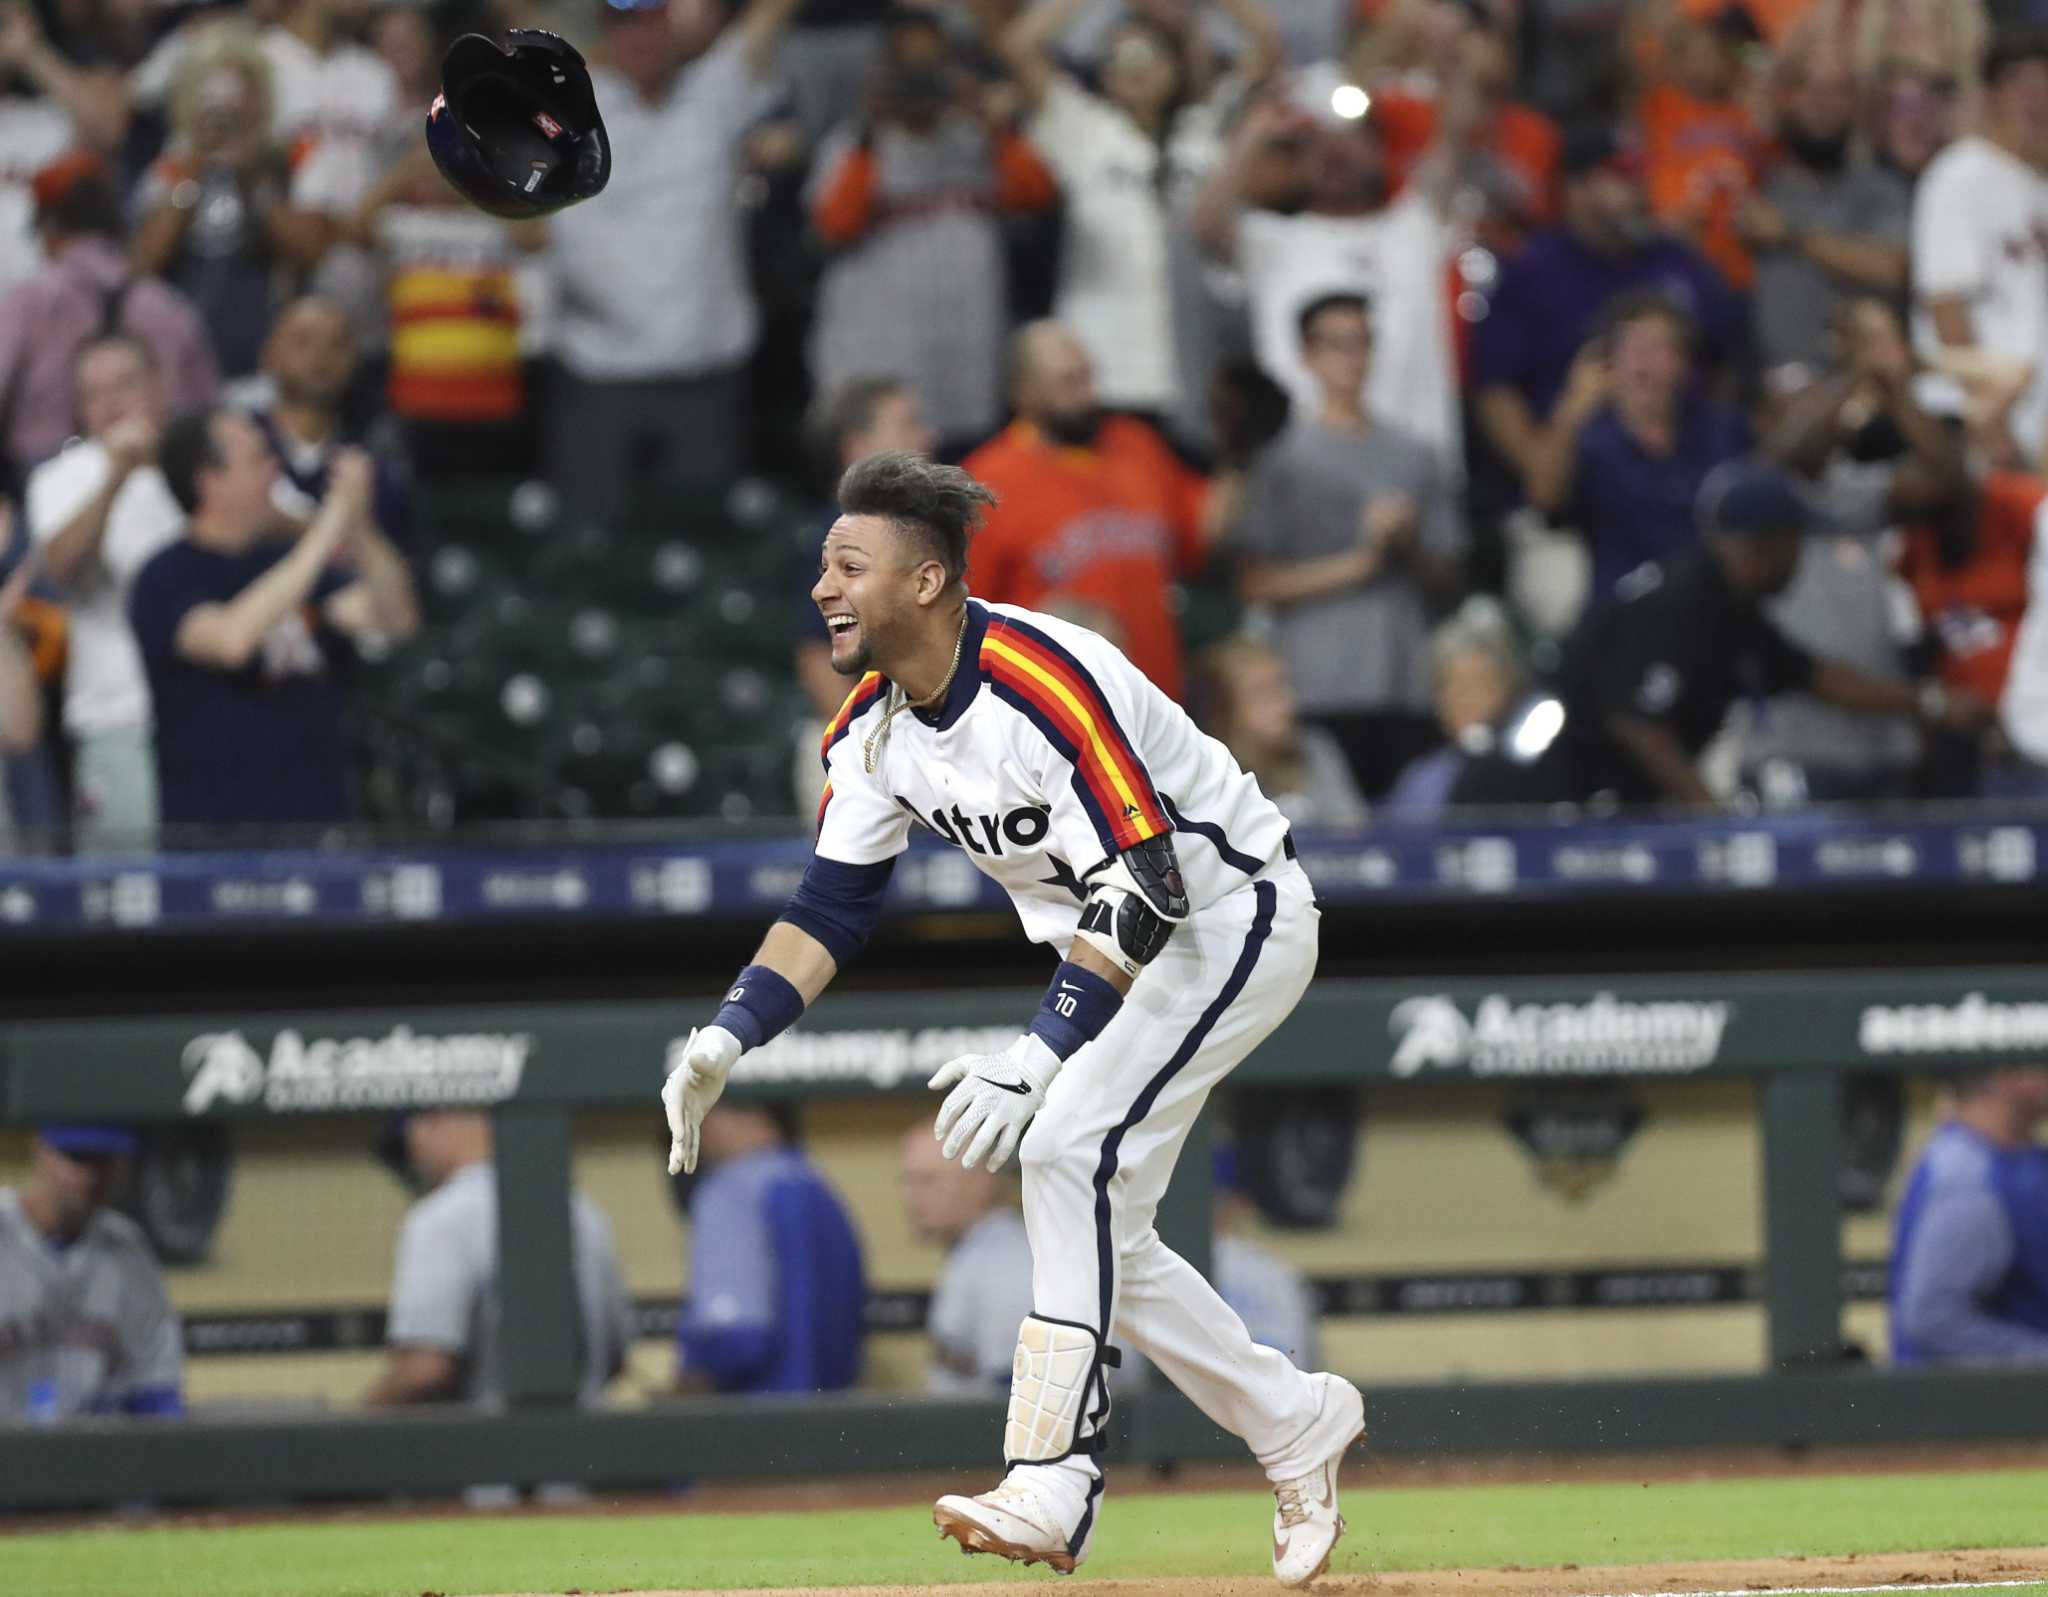 Yuli Gurriel's walkoff homer in the 10th inning lifts Astros over Mariners